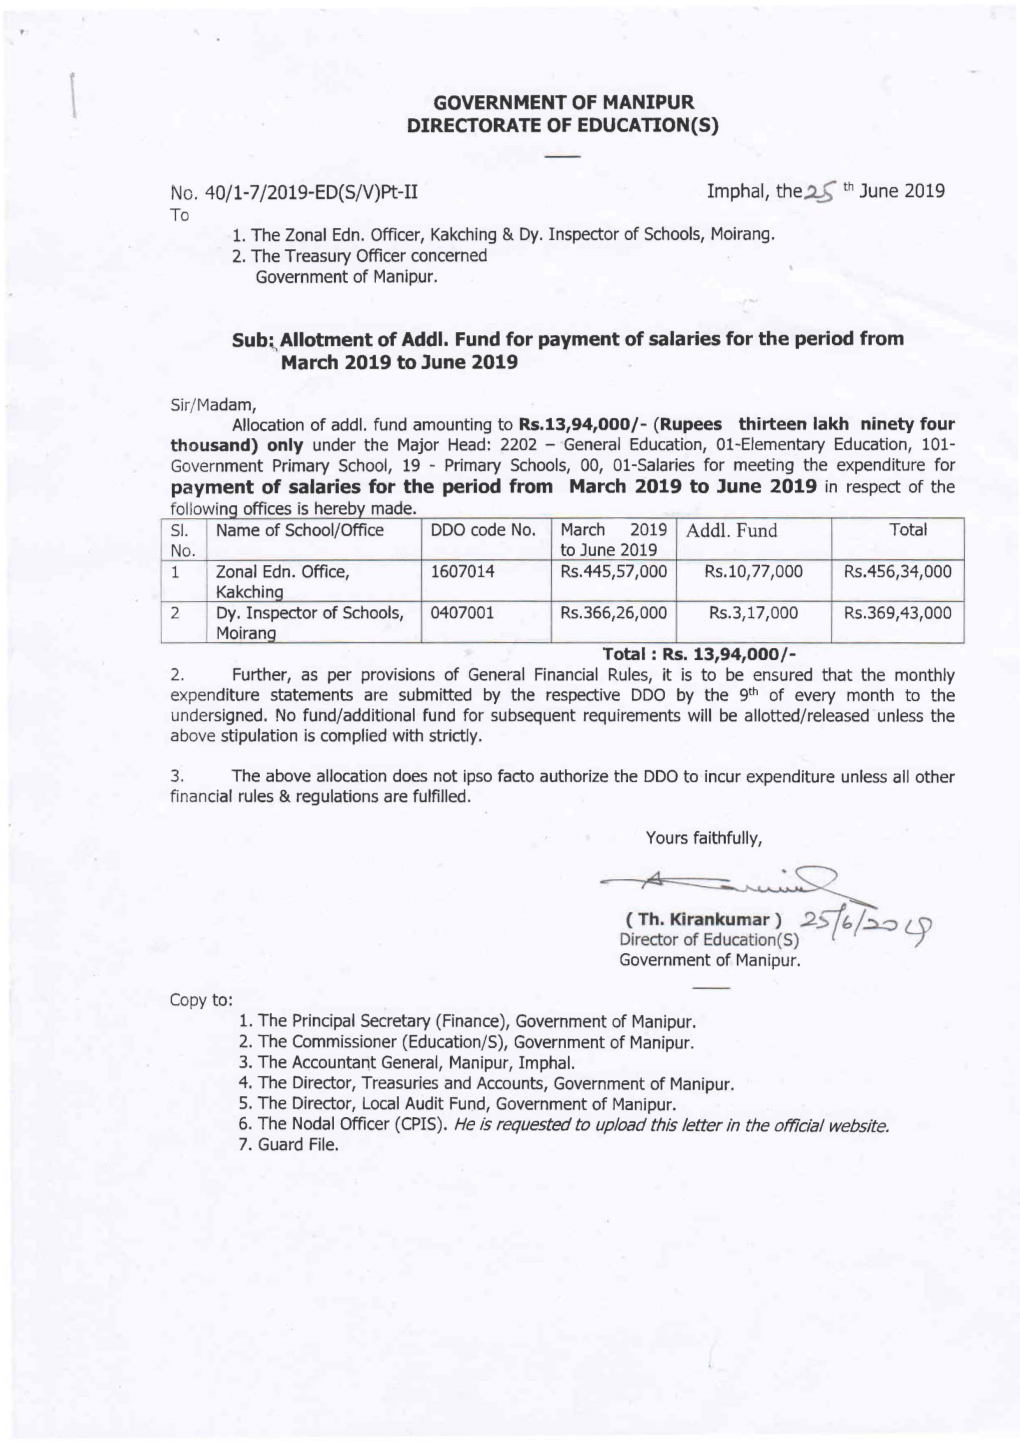 GOVERNMENT of MANIPUR DIRECTORATE of EDUCATION(S)